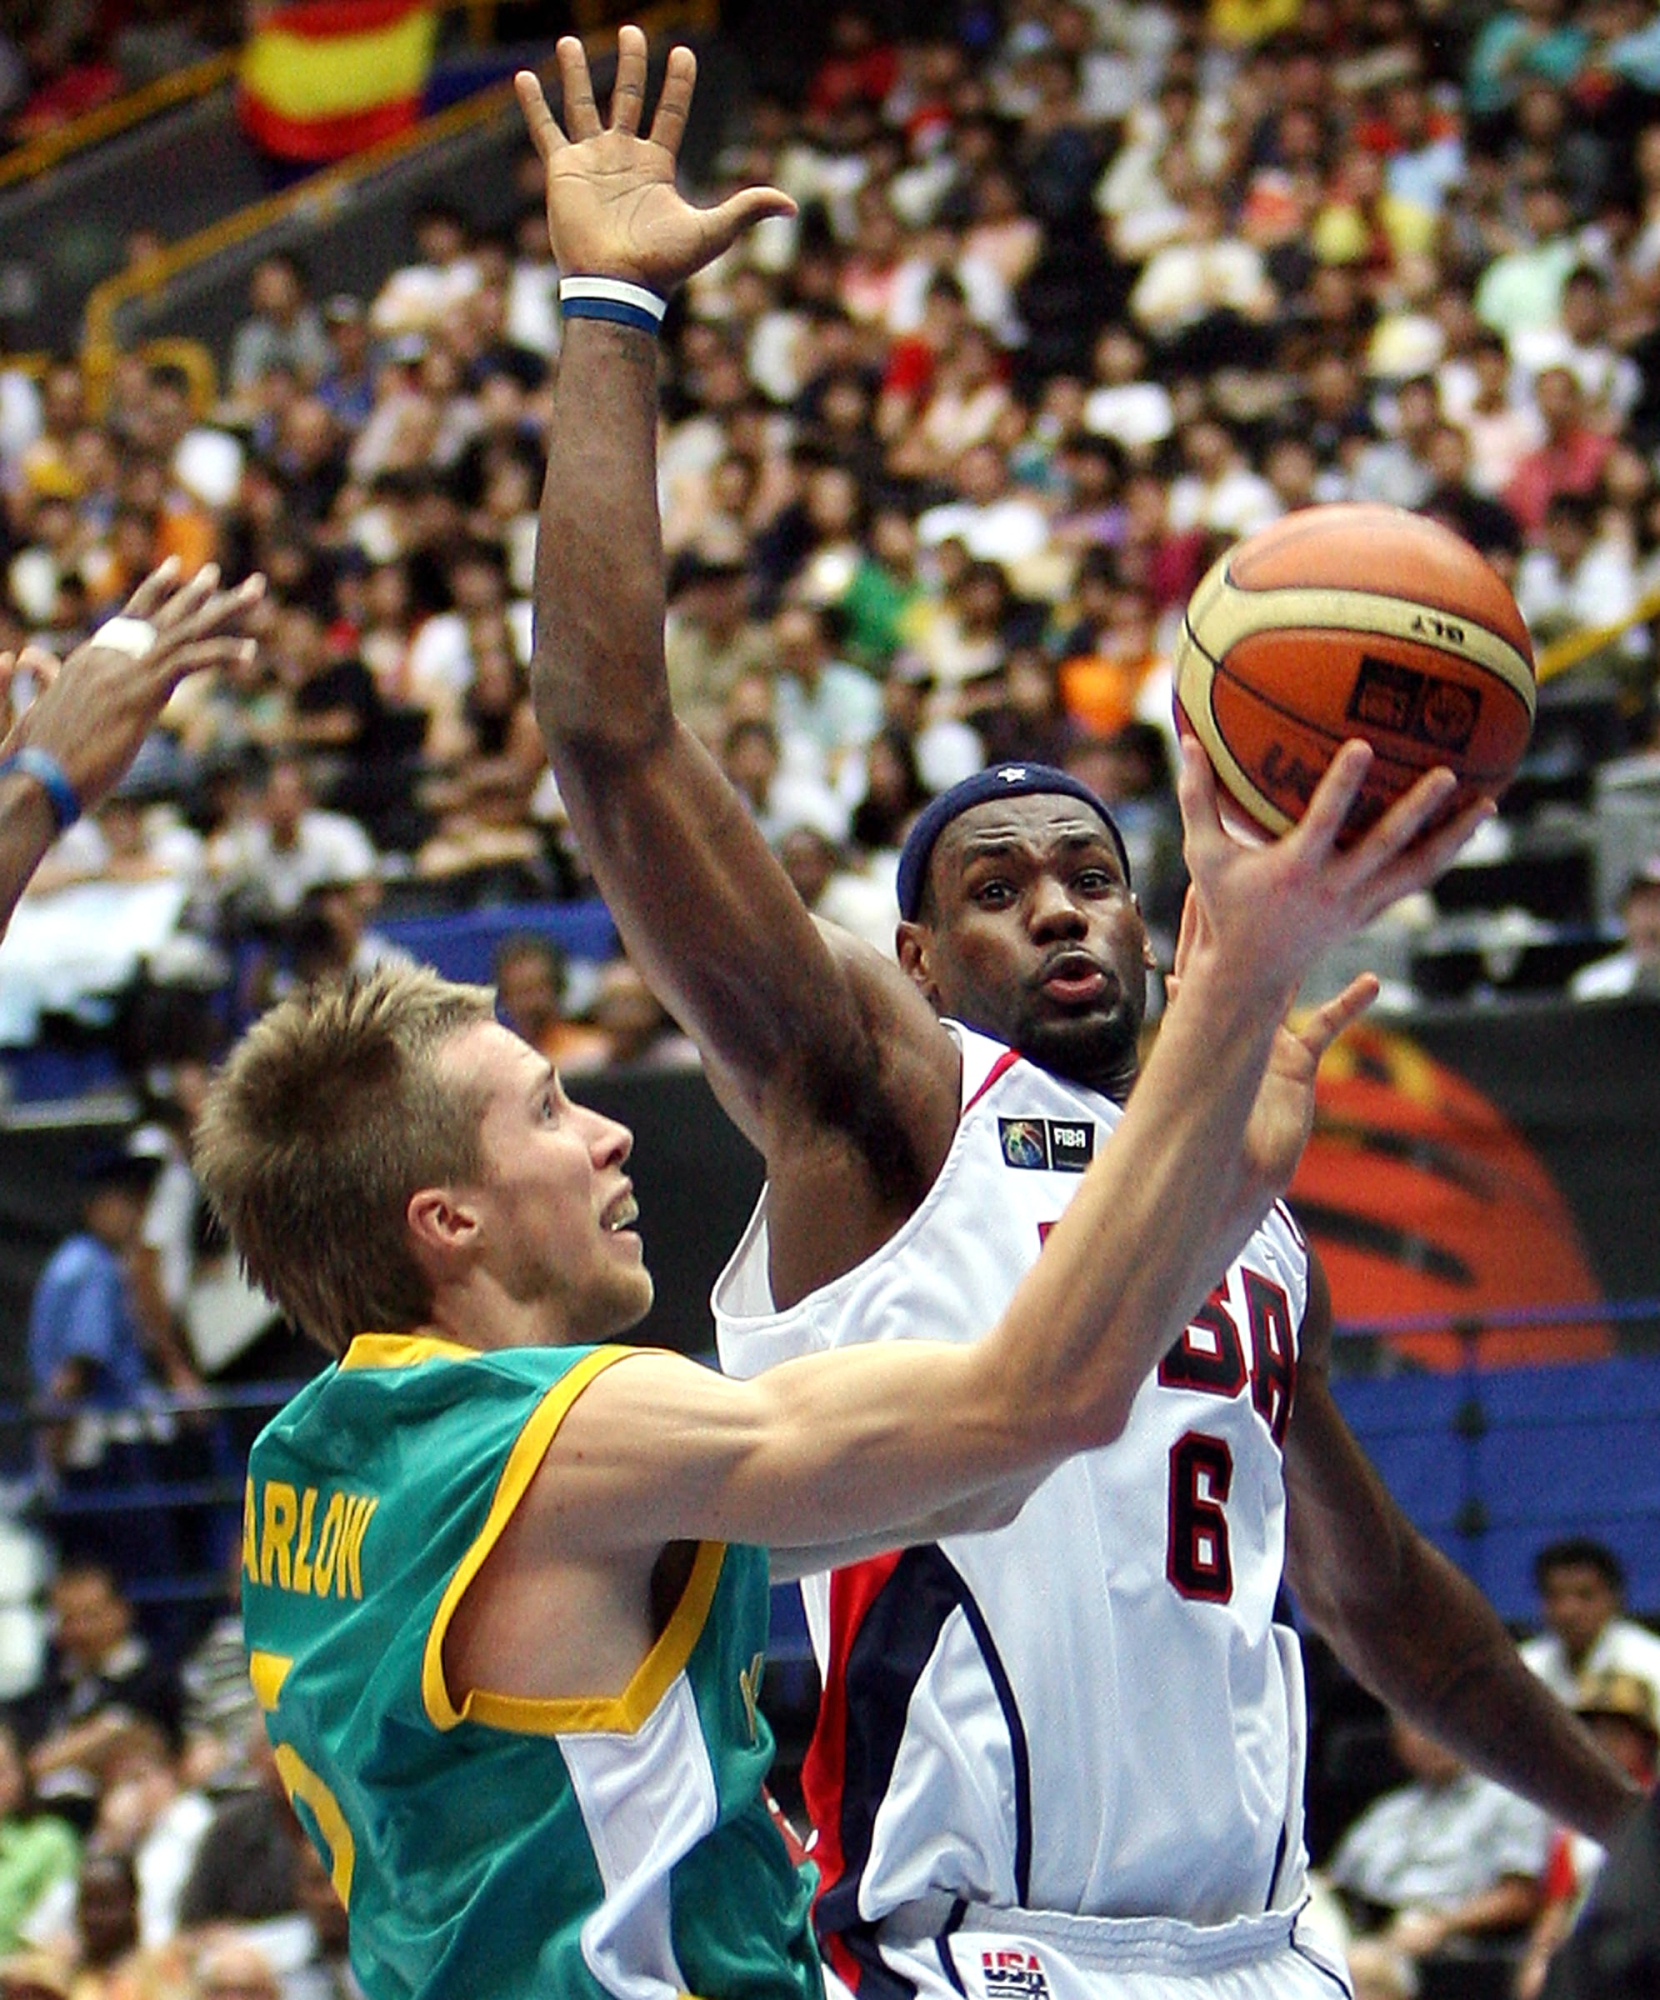 Australia's David Barlow (L) carries the ball under the net while LeBron James of the US (R) extends his hand during the eighth final of the World Basketball Championship in Saitama, suburban Tokyo 27 August 2006.  The US leads Australia 59-29 after the first half.    AFP PHOTO / YOSHIKAZU TSUNO (Photo by AFP)